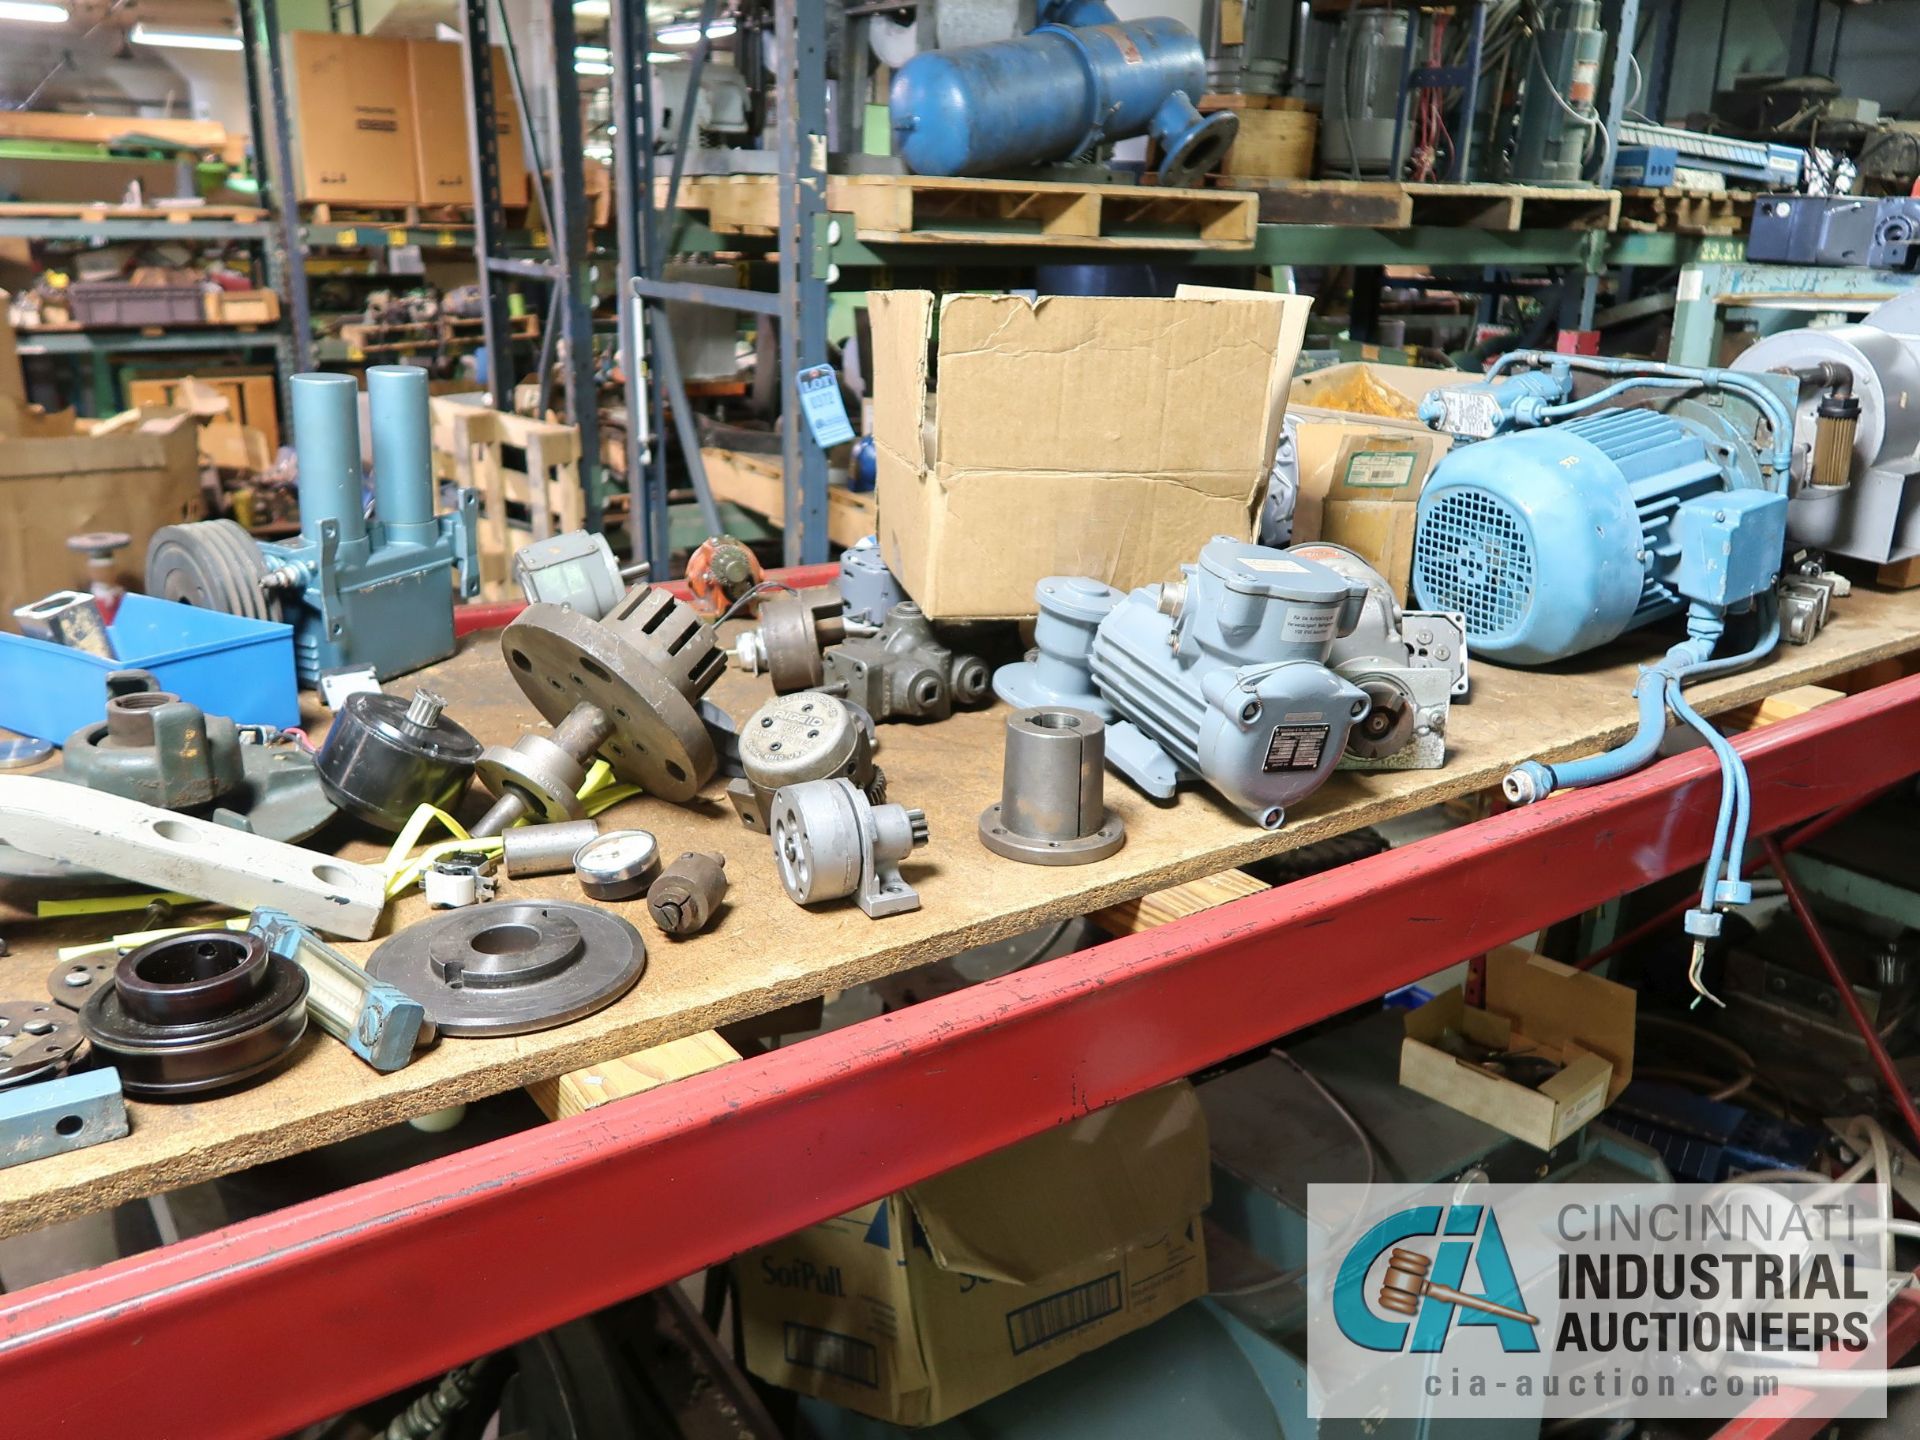 (LOT) MACHINE PARTS, COMPRESSORS, REDUCERS, GEARS, MOTORS, AND OTHER (4) SECTIONS RACK - Image 20 of 28